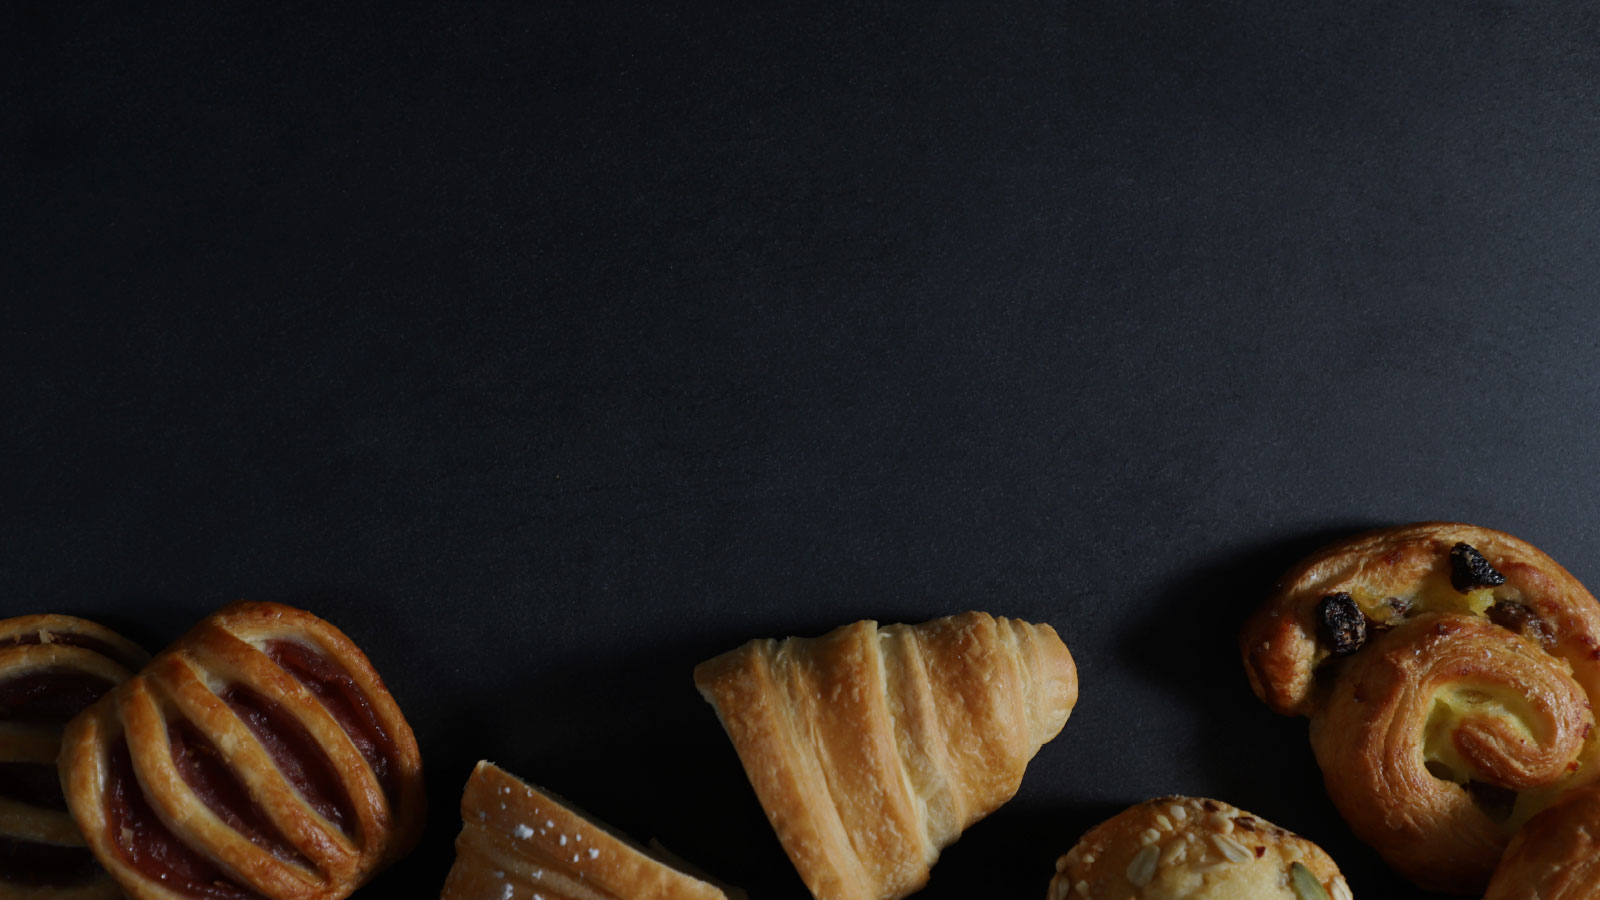 Viennoiserie products